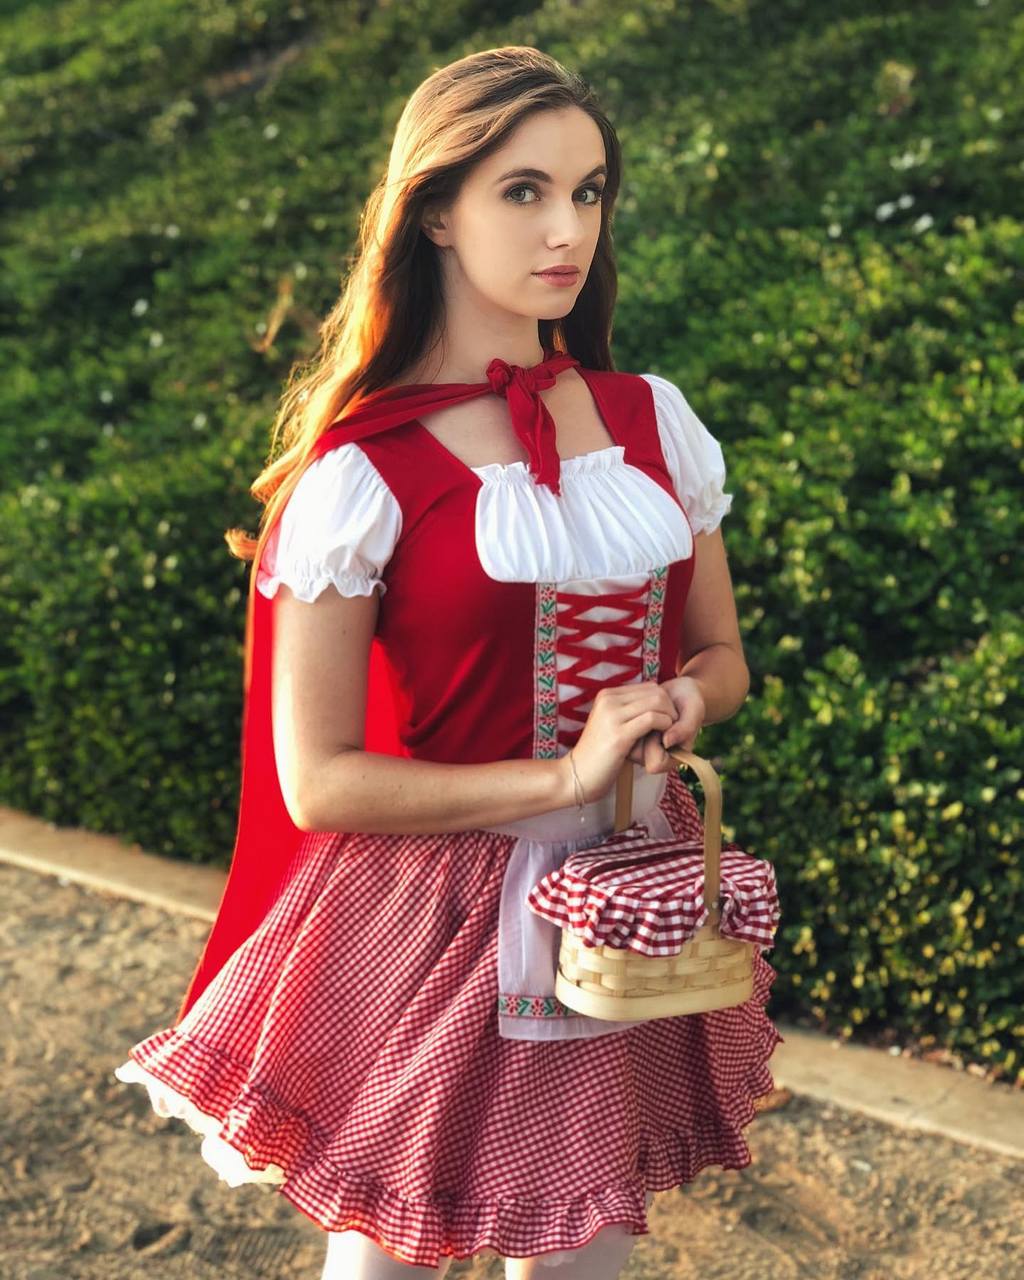 Little Red Riding Hood By Darthlexi